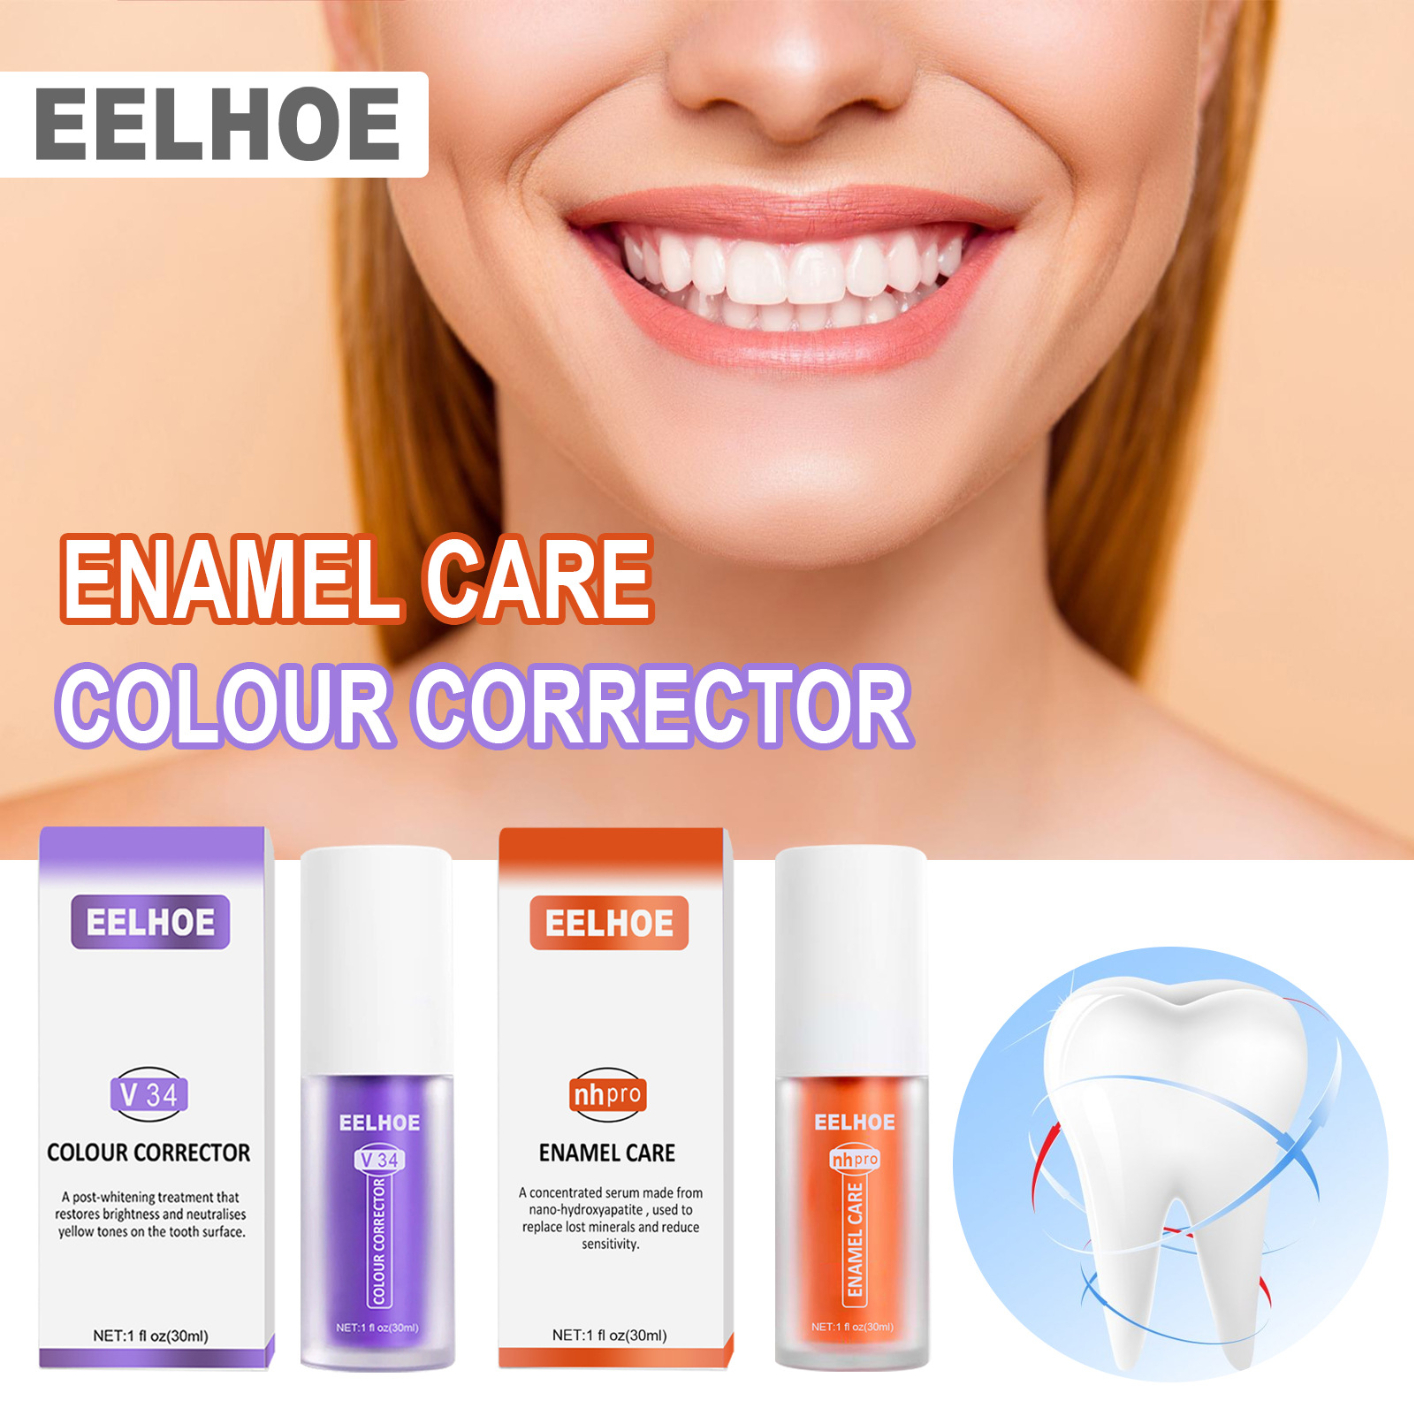 V34 Colour Corrector and Nhpro Enamel Care Toothpaste Kit, Purple Toothpaste for Teeth Whitening and Teeth Cleaning